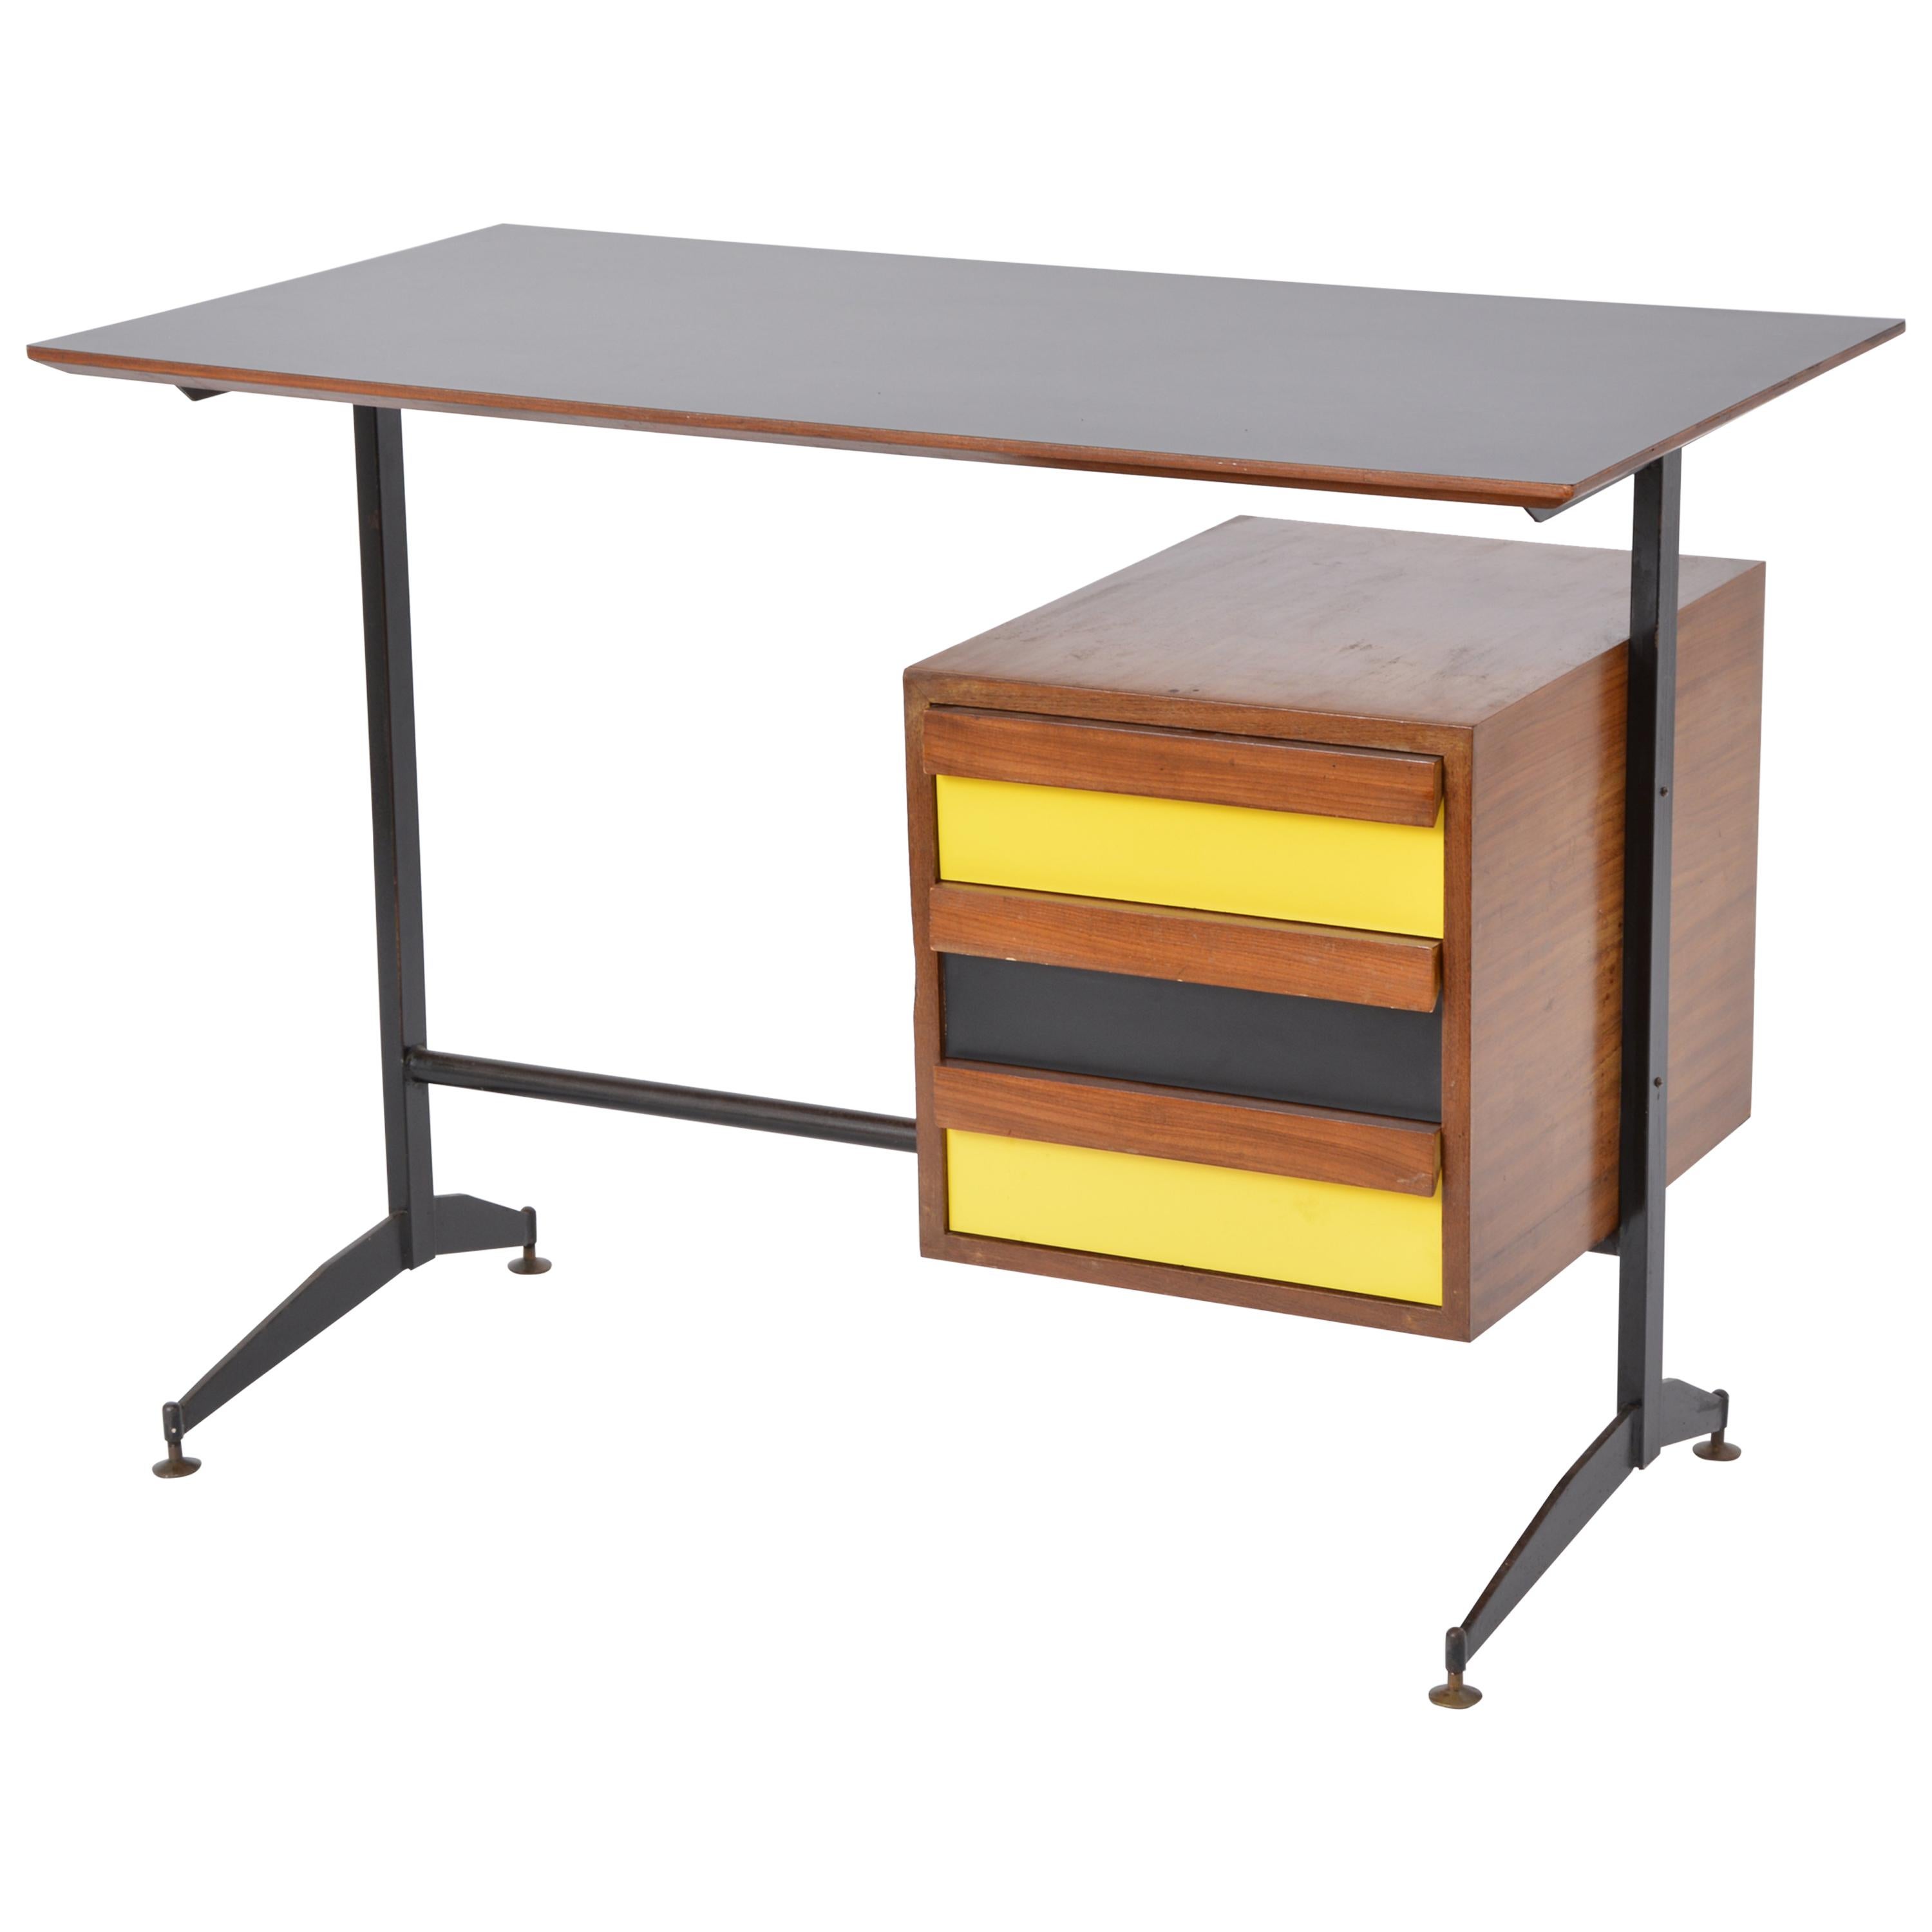 This desk was produced in Italy in the 1960s. It features a structure made of lacquered metal. The top is made of Formica and drawers are made of teak wood.